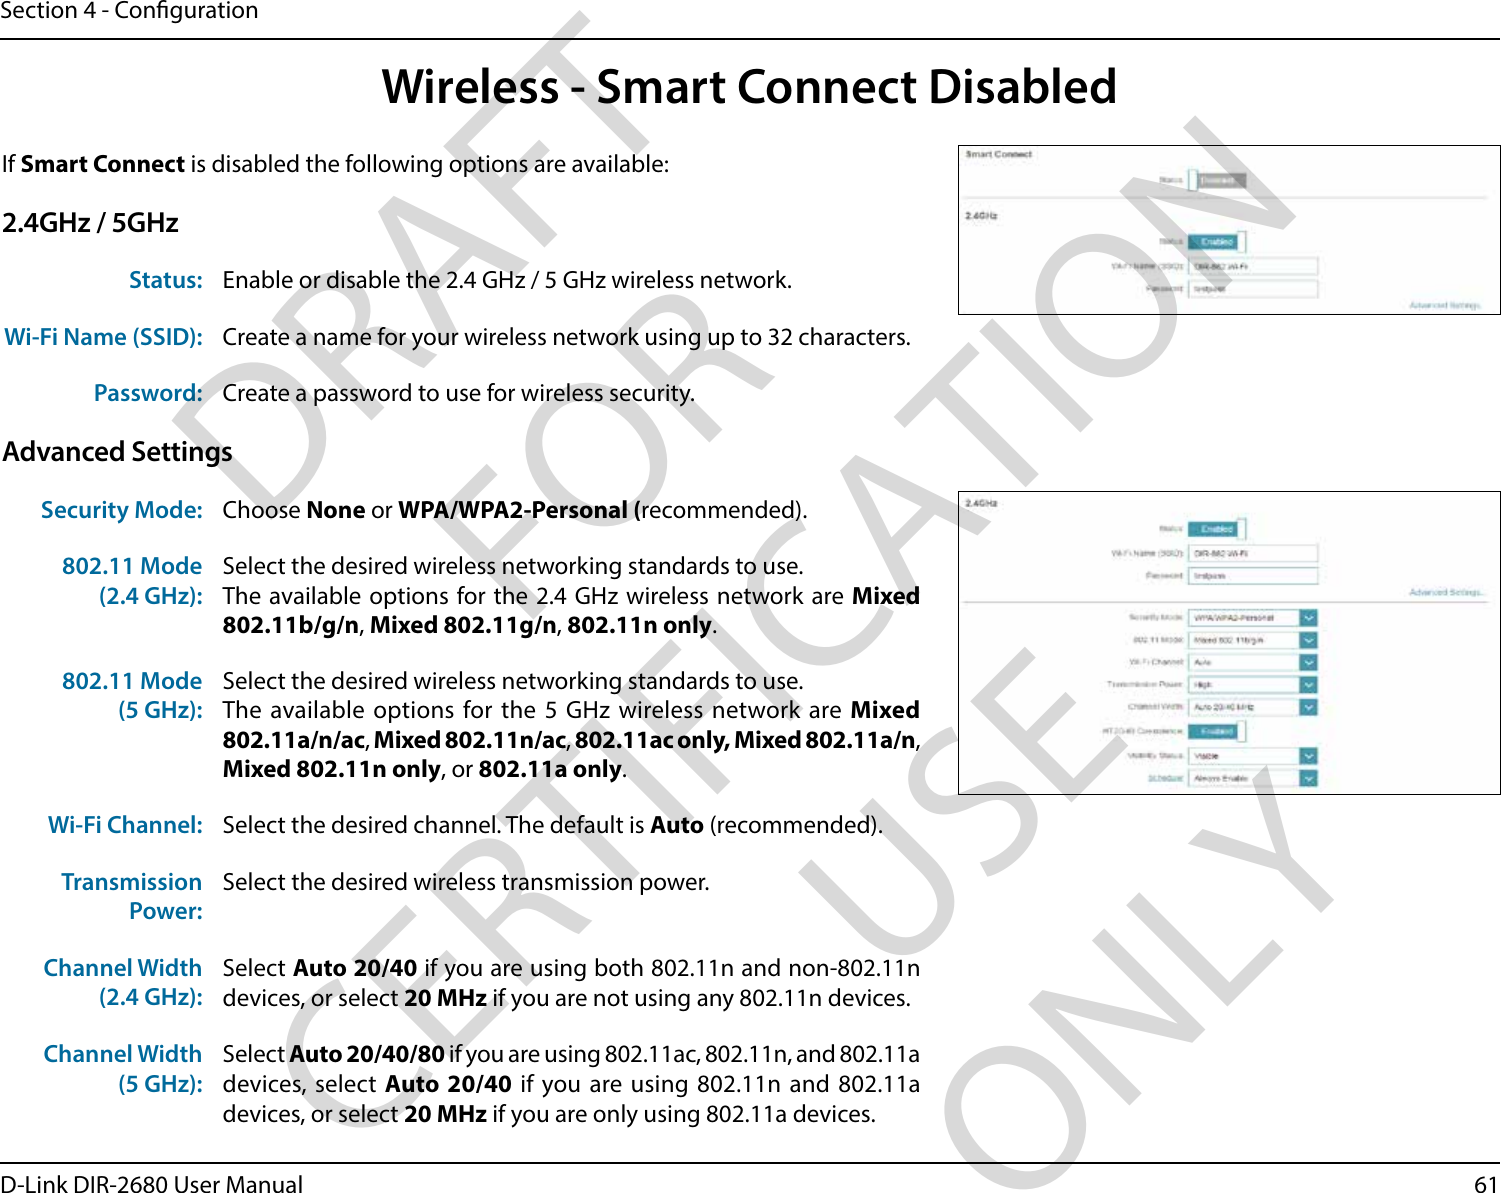 61D-Link DIR-2680 User ManualSection 4 - CongurationIf Smart Connect is disabled the following options are available:2.4GHz / 5GHzStatus: Enable or disable the 2.4 GHz / 5 GHz wireless network.Wi-Fi Name (SSID): Create a name for your wireless network using up to 32 characters. Password: Create a password to use for wireless security. Advanced SettingsSecurity Mode: Choose None or WPA/WPA2-Personal (recommended).802.11 Mode (2.4 GHz):Select the desired wireless networking standards to use. The available options for the 2.4 GHz wireless network are Mixed 802.11b/g/n, Mixed 802.11g/n, 802.11n only. 802.11 Mode (5 GHz):Select the desired wireless networking standards to use. The available options for the 5 GHz wireless network are Mixed 802.11a/n/ac, Mixed 802.11n/ac, 802.11ac only, Mixed 802.11a/n, Mixed 802.11n only, or 802.11a only.Wi-Fi Channel: Select the desired channel. The default is Auto (recommended).Transmission Power:Select the desired wireless transmission power.Channel Width(2.4 GHz):Select Auto 20/40 if you are using both 802.11n and non-802.11n devices, or select 20 MHz if you are not using any 802.11n devices.Channel Width(5 GHz):Select Auto 20/40/80 if you are using 802.11ac, 802.11n, and 802.11a devices, select  Auto 20/40 if you are using 802.11n and 802.11a devices, or select 20 MHz if you are only using 802.11a devices.Wireless - Smart Connect DisabledDRAFT FOR CERTIFICATION USE ONLY